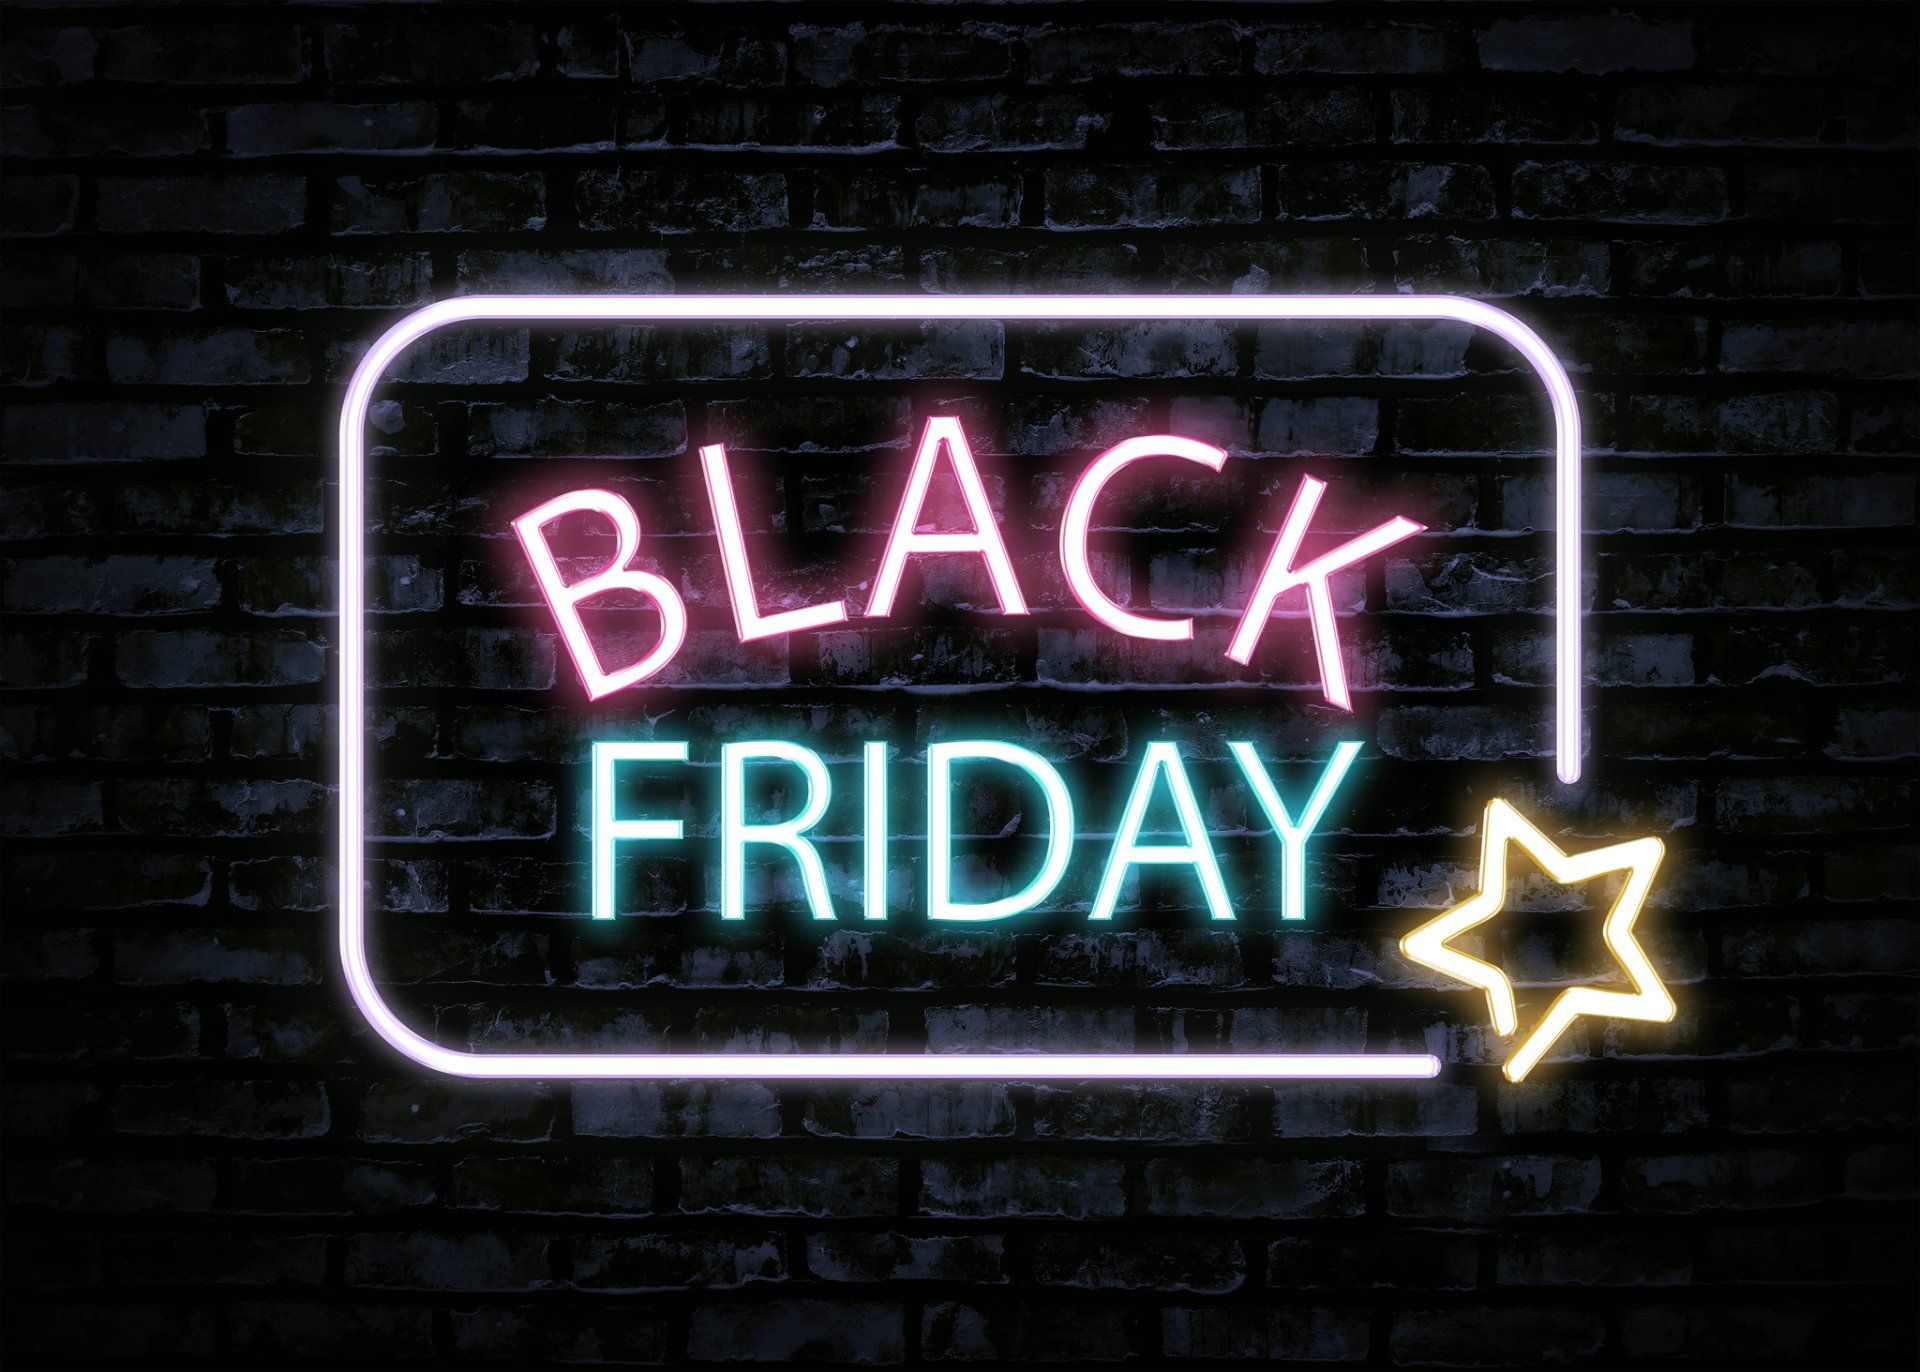 Black Friday Neon Lights - Fort Wayne, IN - The Sign Guy